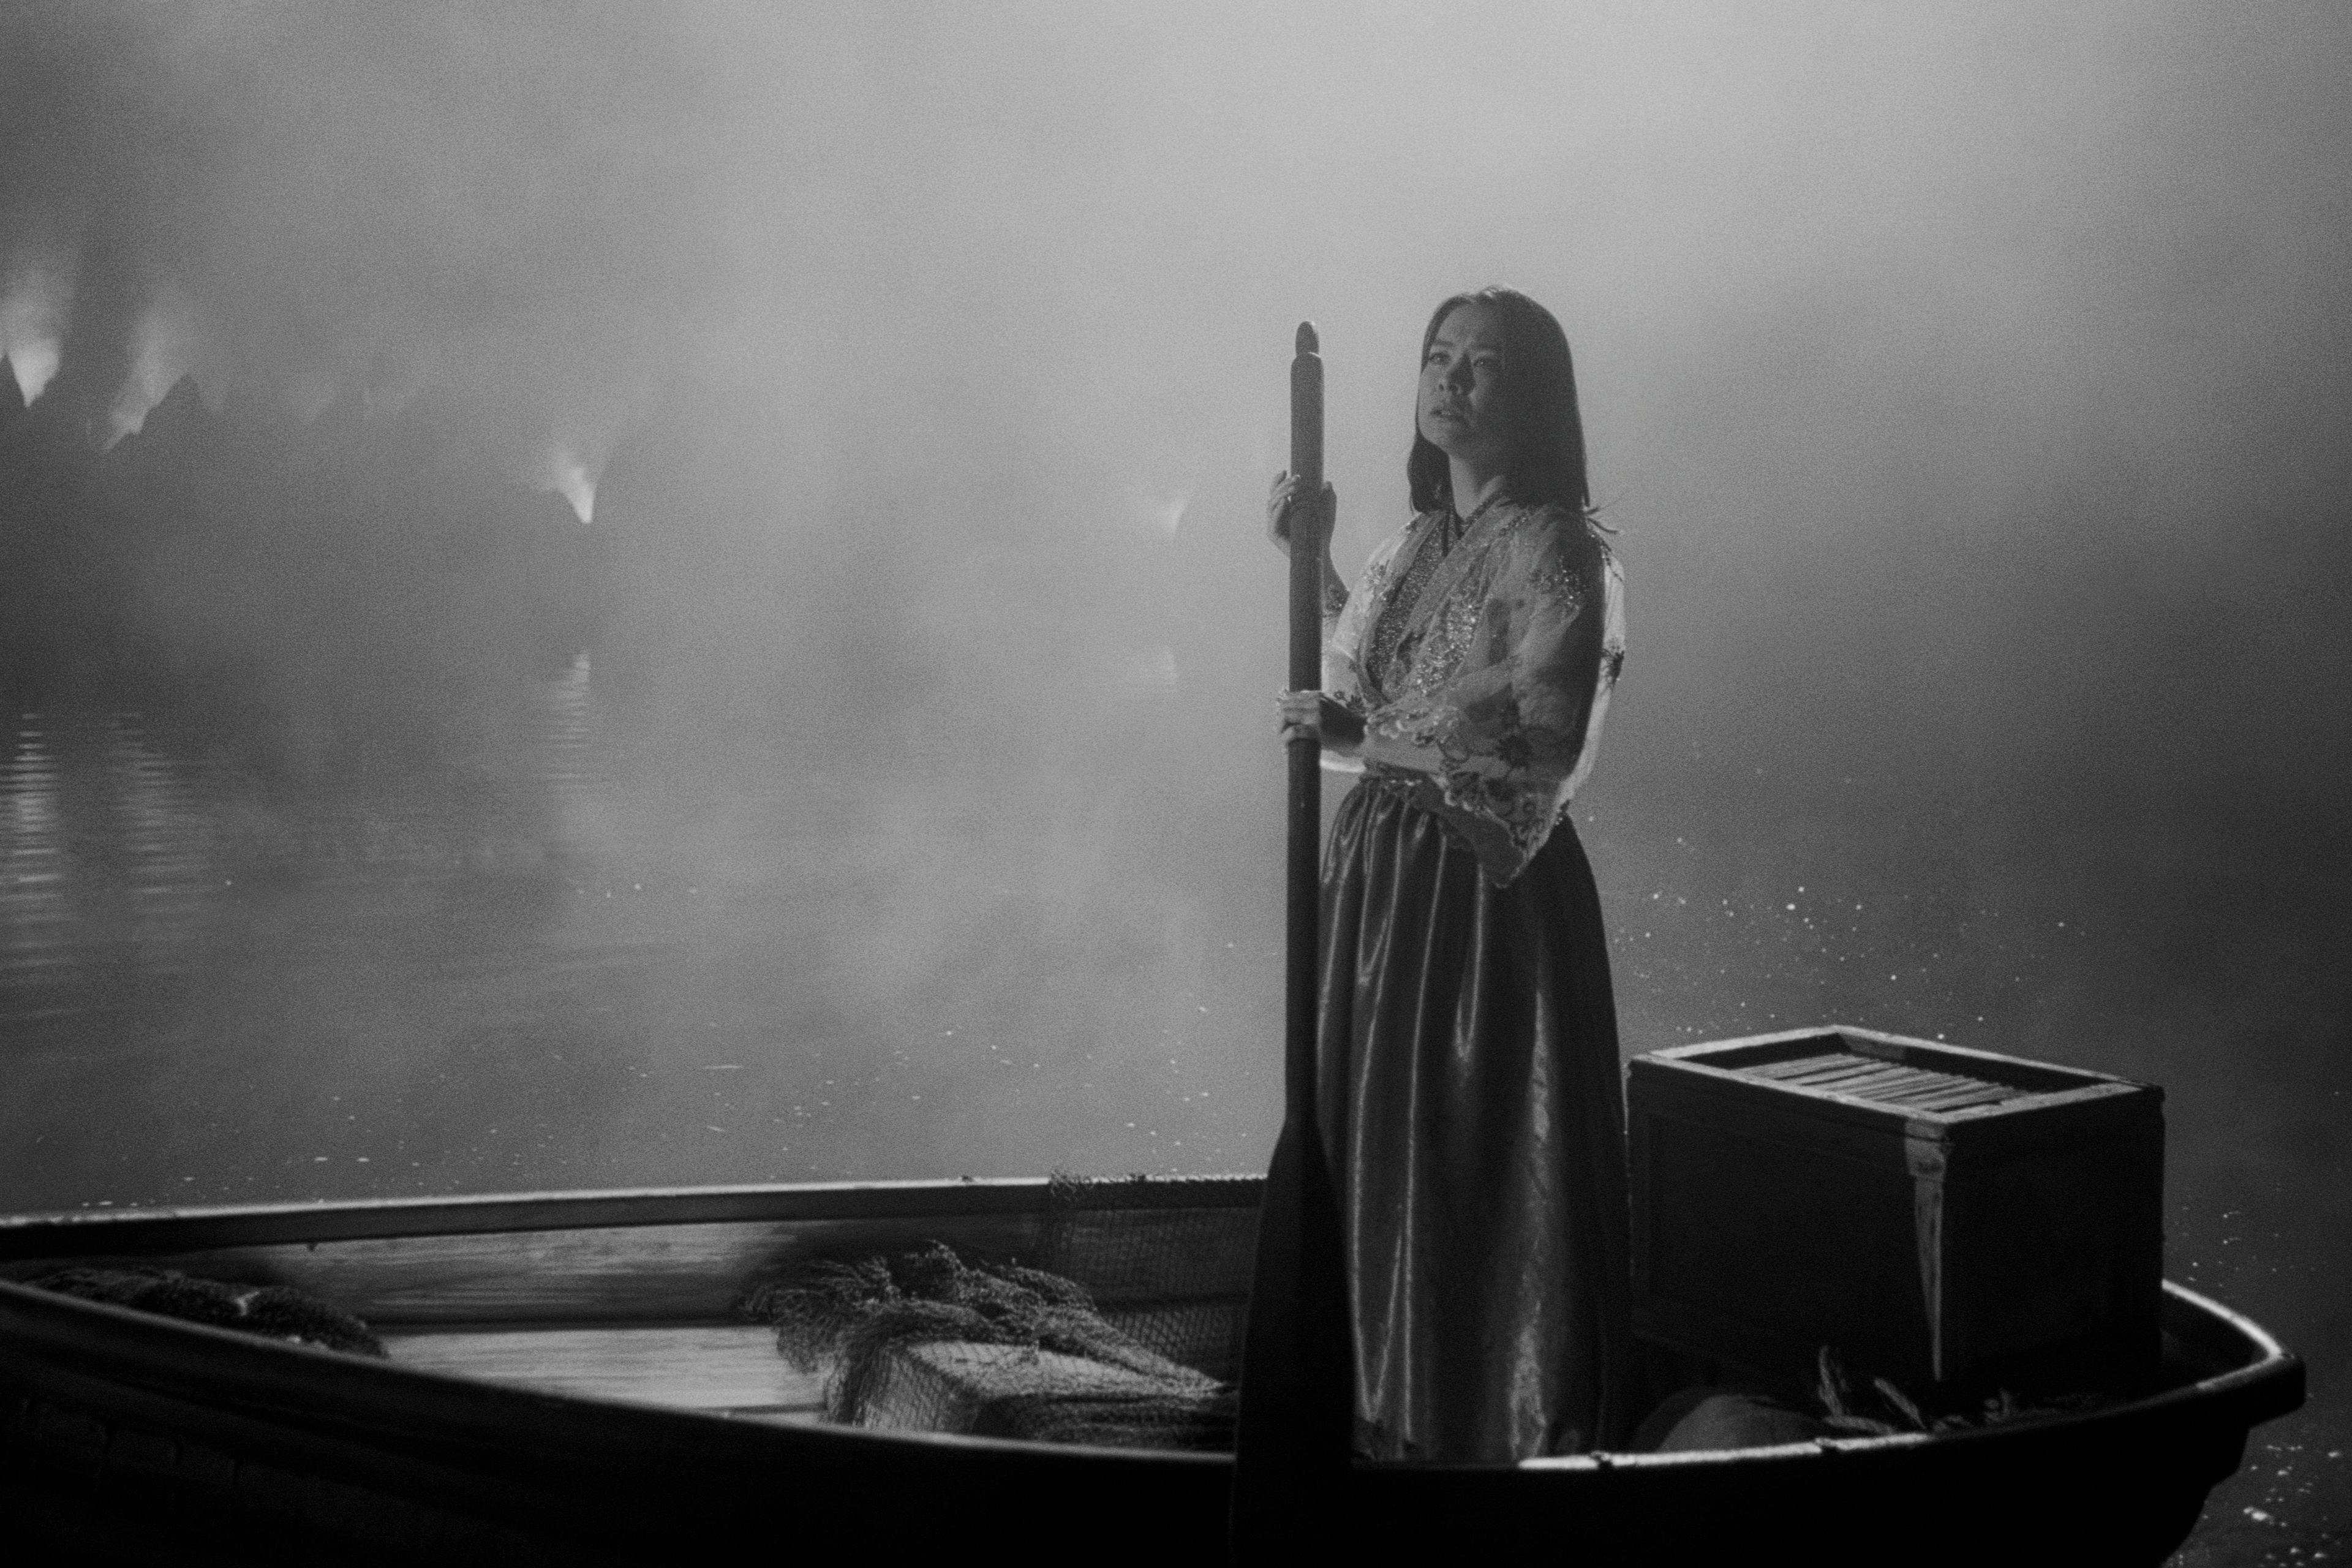 Mitski standing upright in the rowboat with an oar in her hand